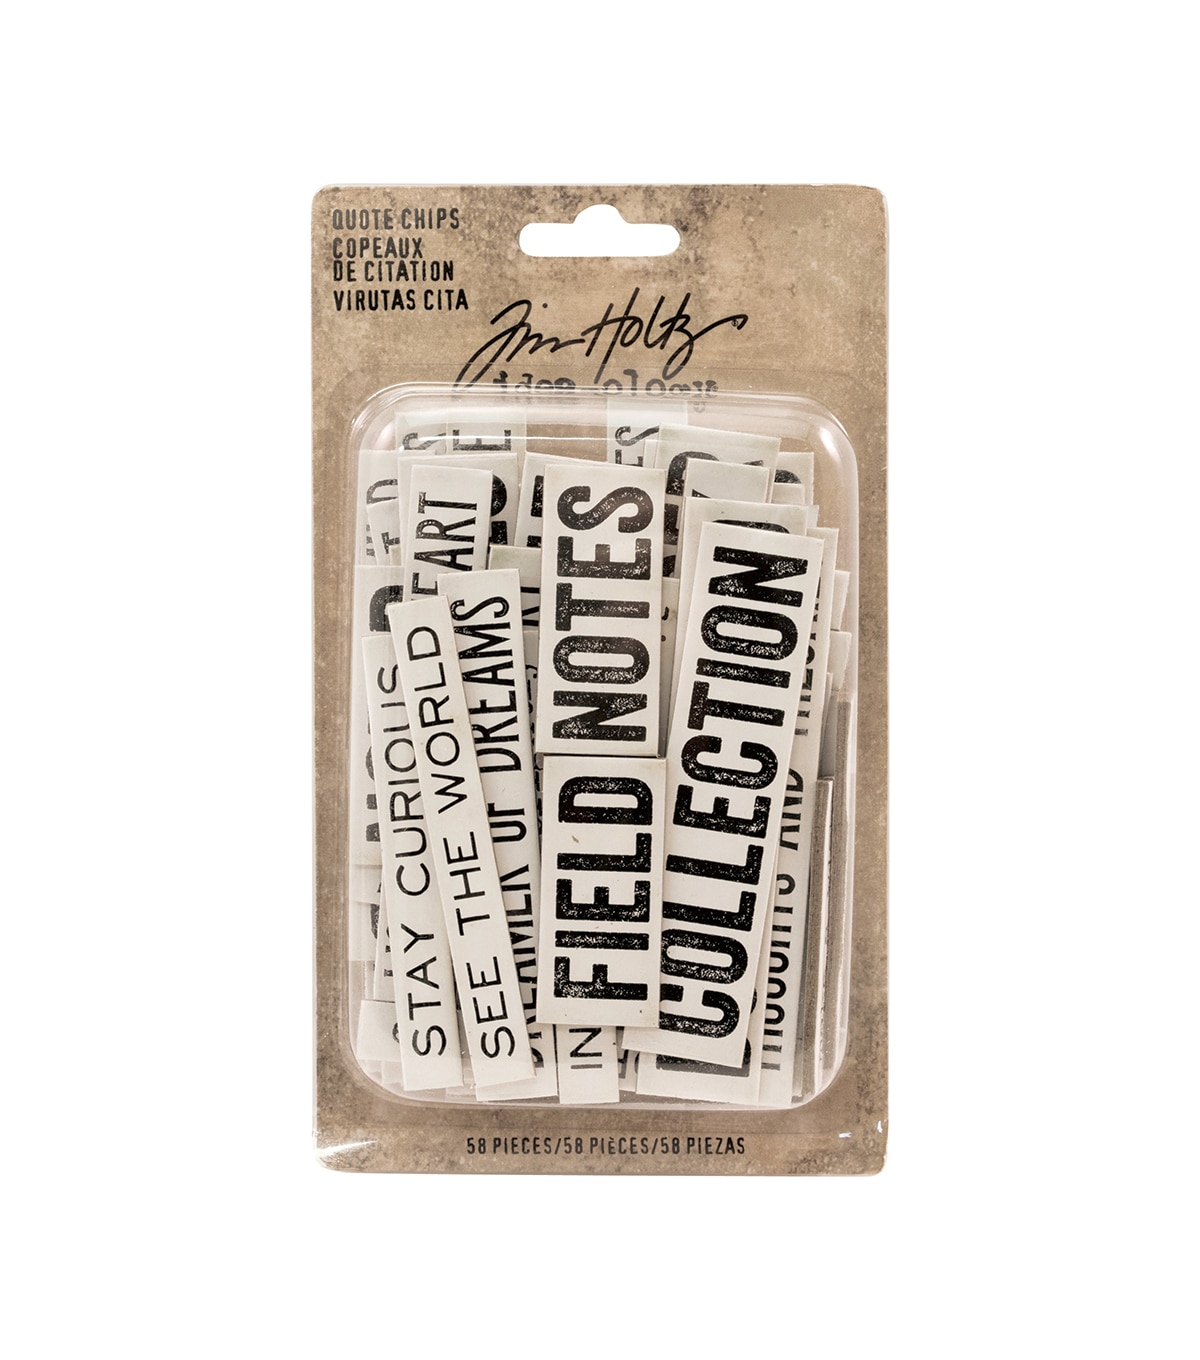 Tim Holtz Idea Ology Quote Chips JOANN